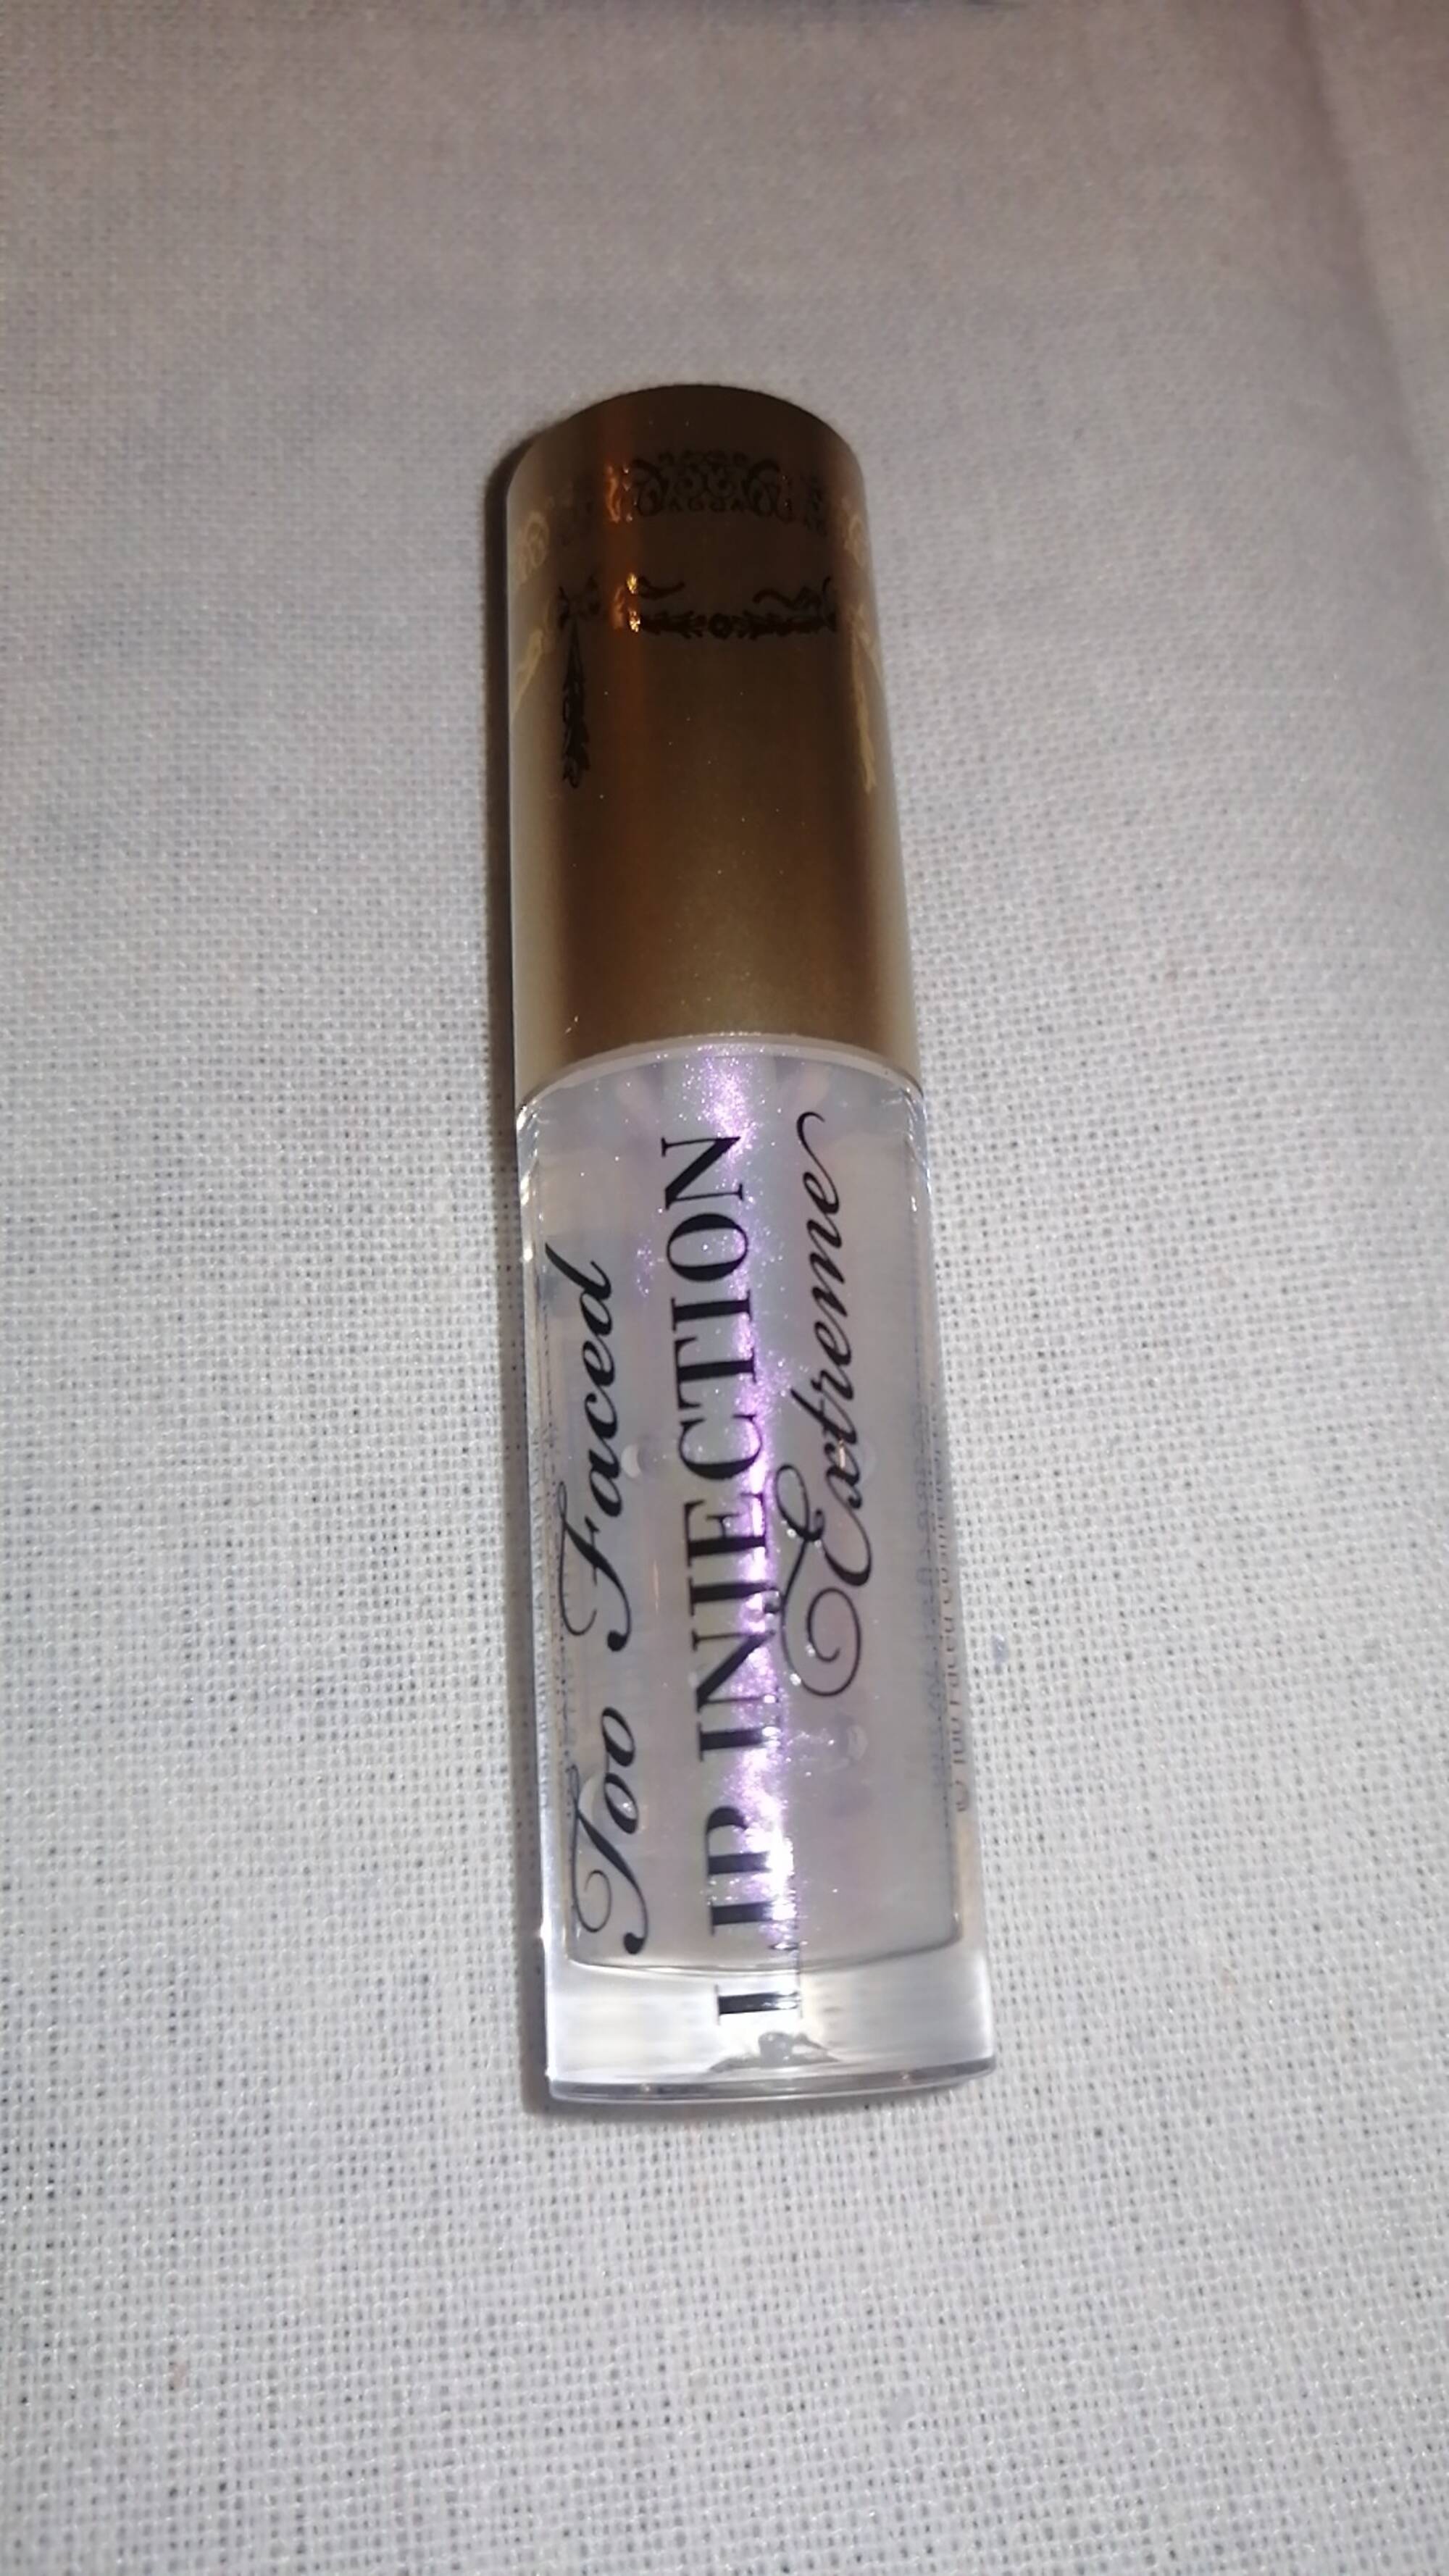 TOO FACED - Lip injection extreme